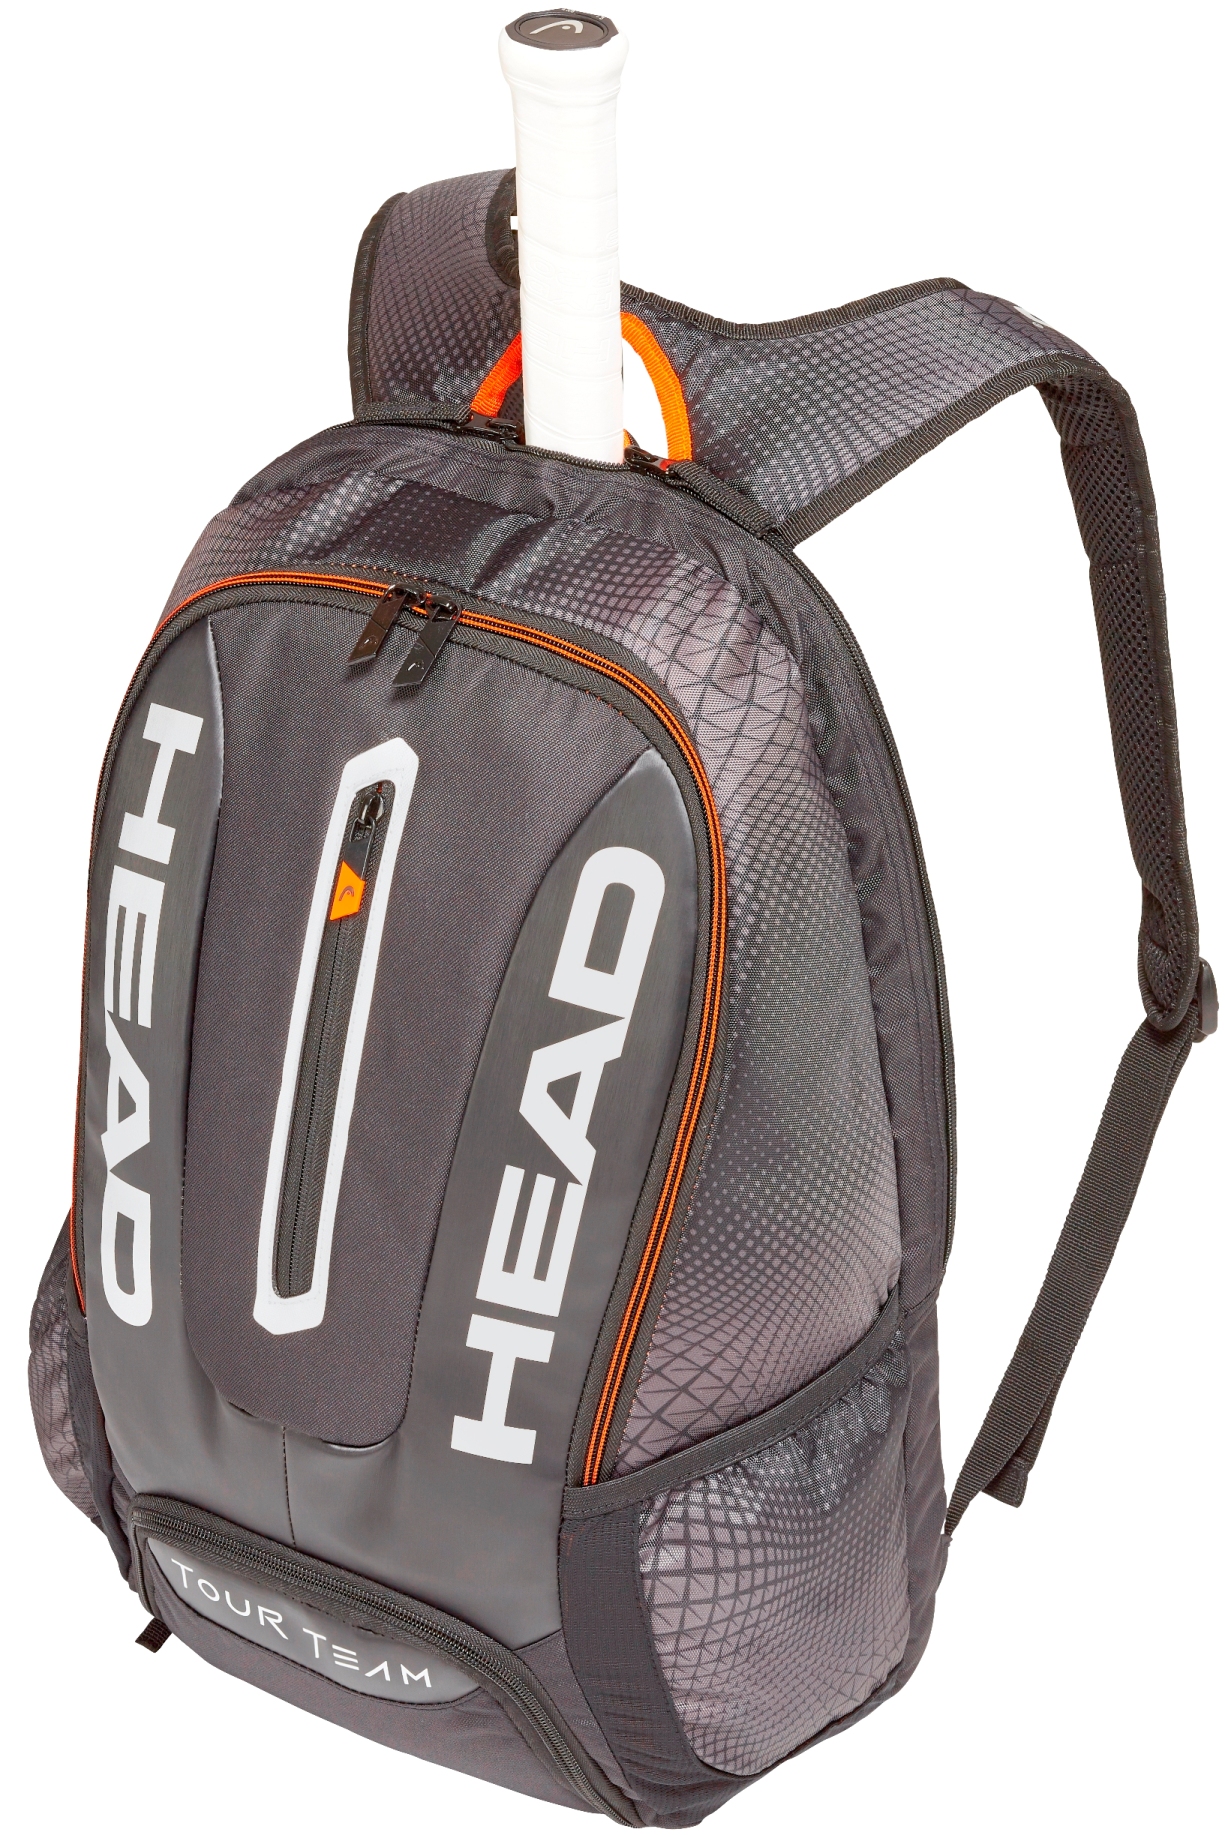 tennis bag with shoe compartment